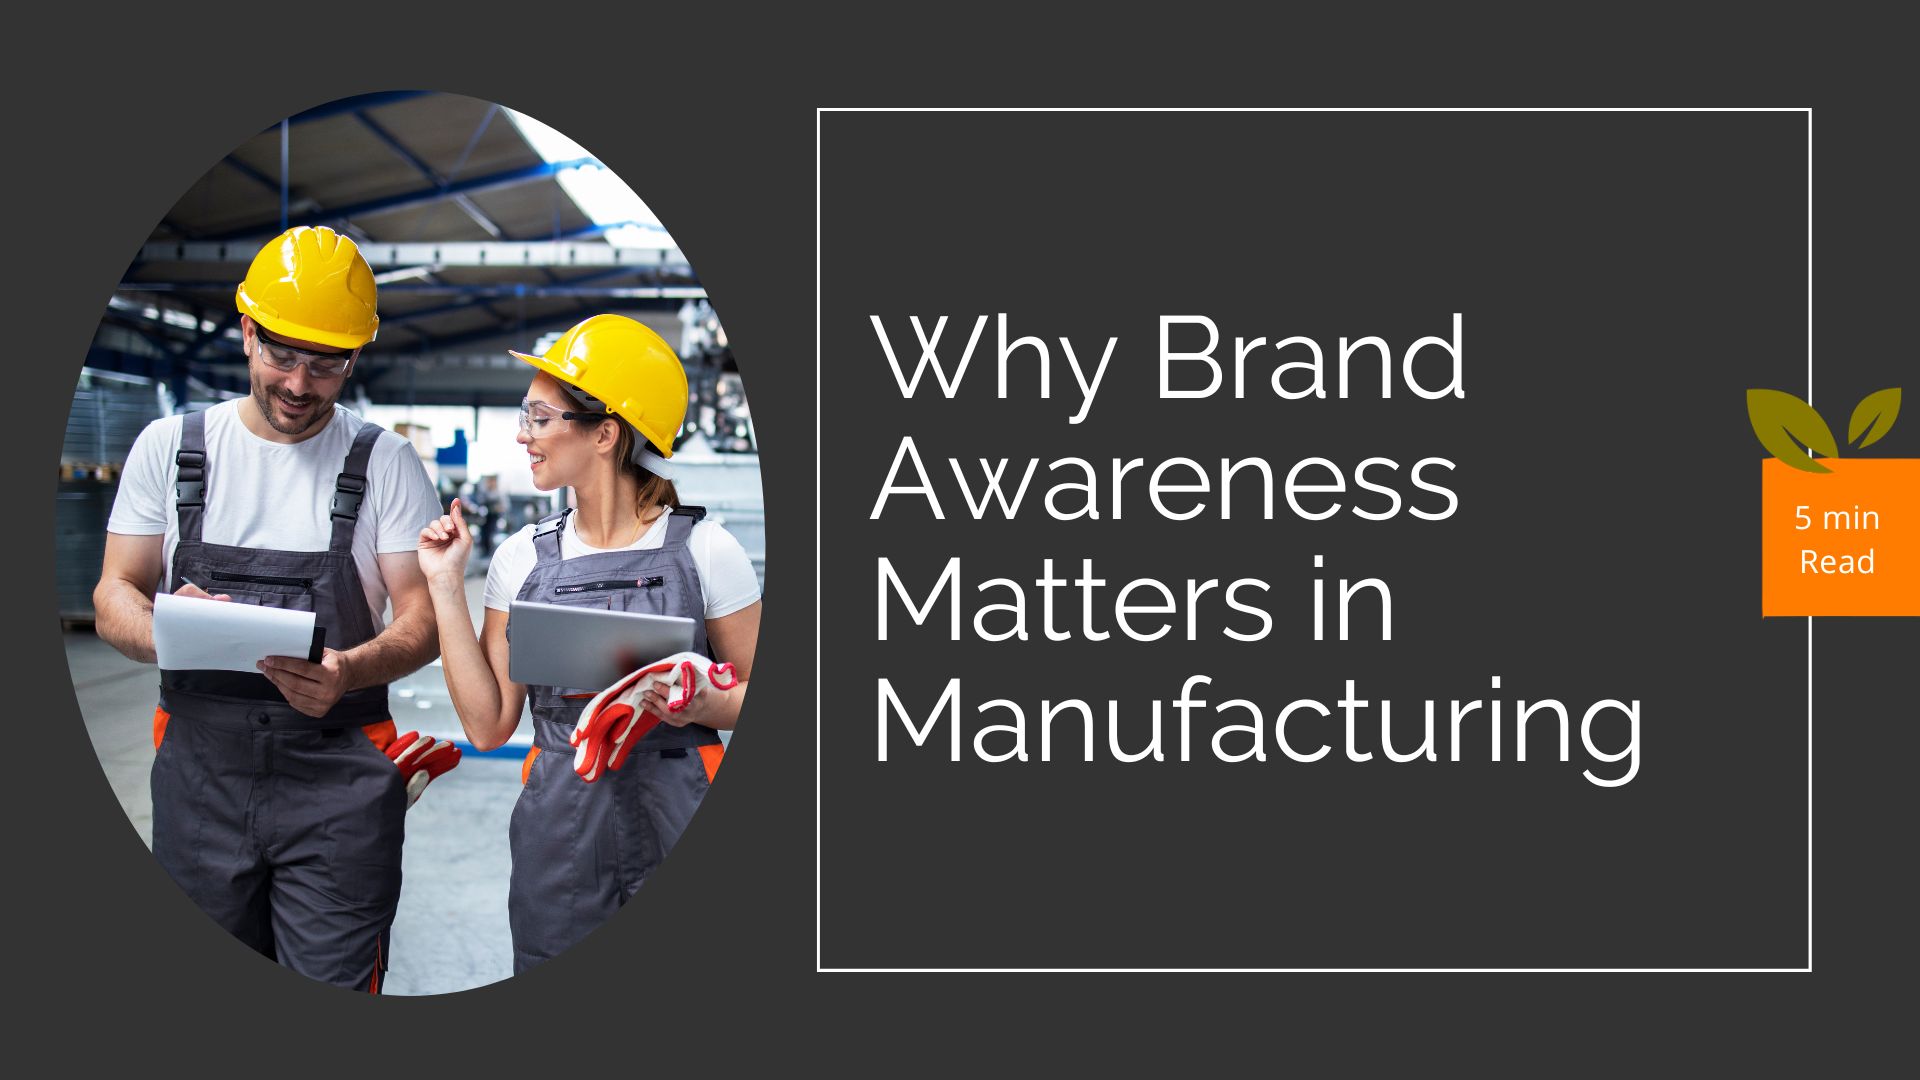 Why is Brand Awareness Important in Manufacturing